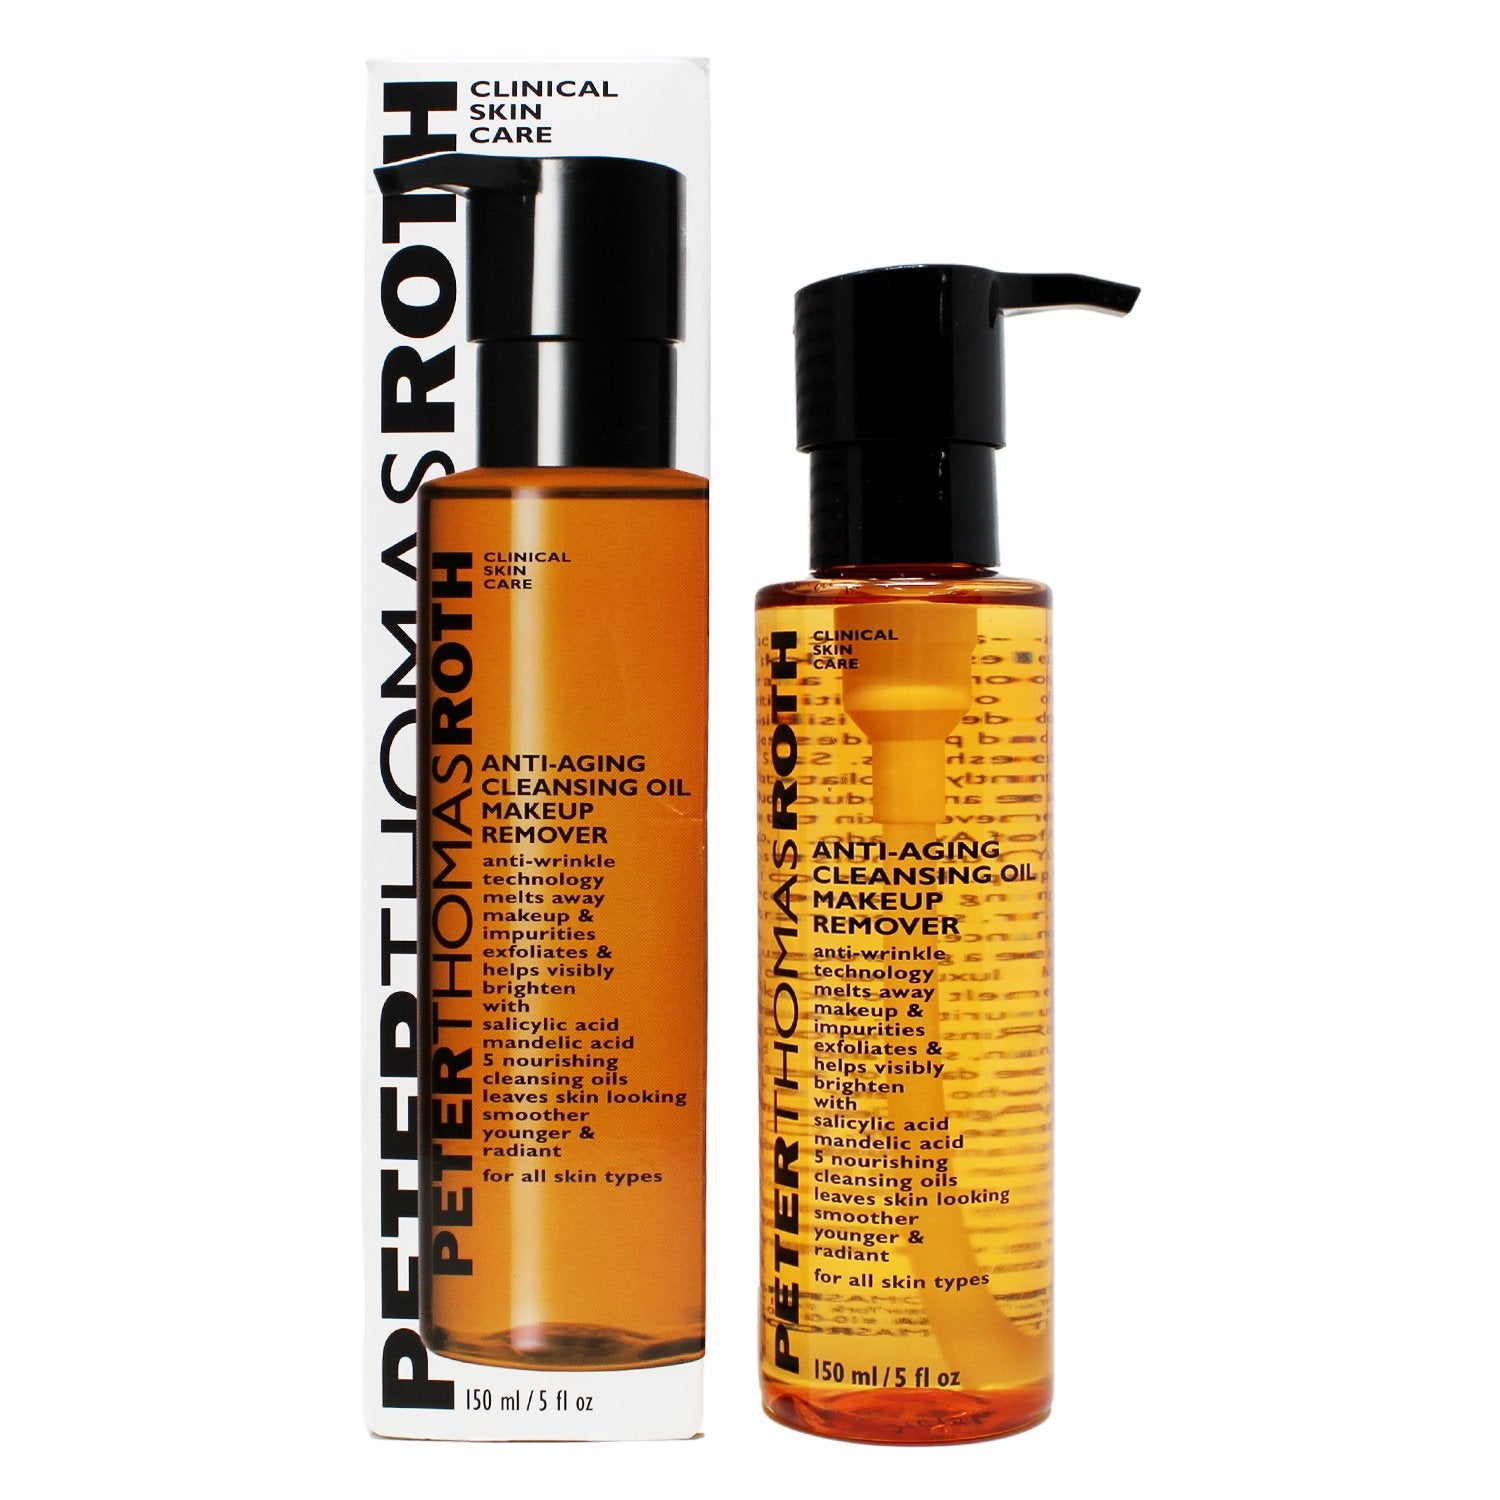 Peter Thomas Roth Anti-Aging Cleansing Oil Makeup Remover 5 oz